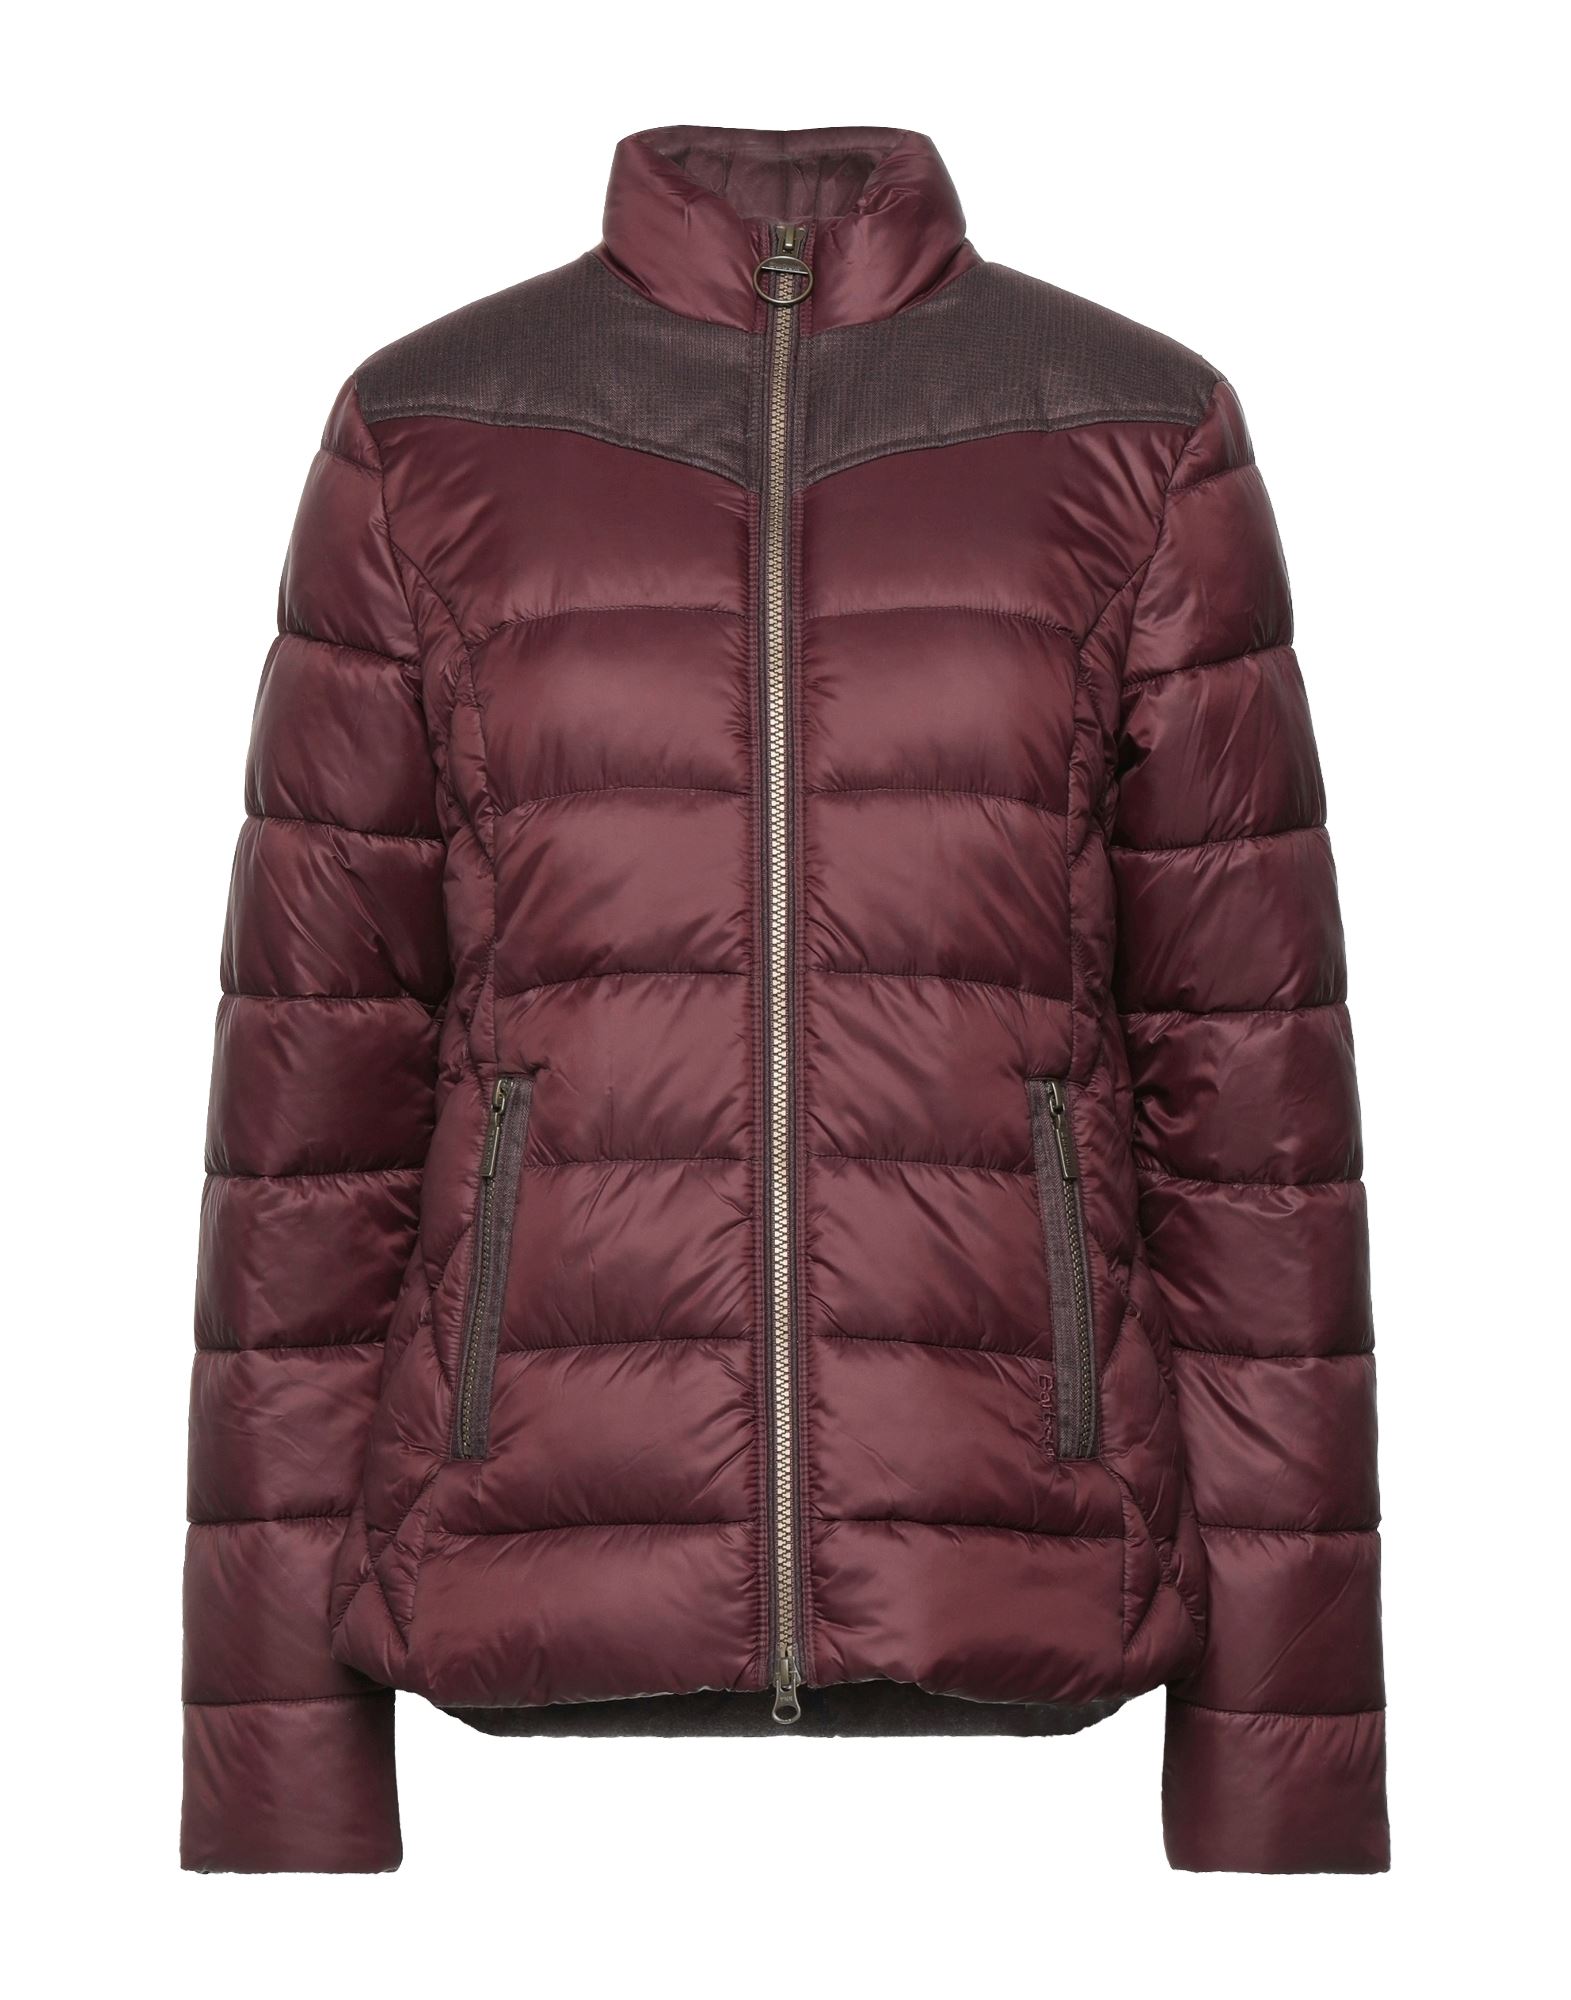 BARBOUR Down jackets